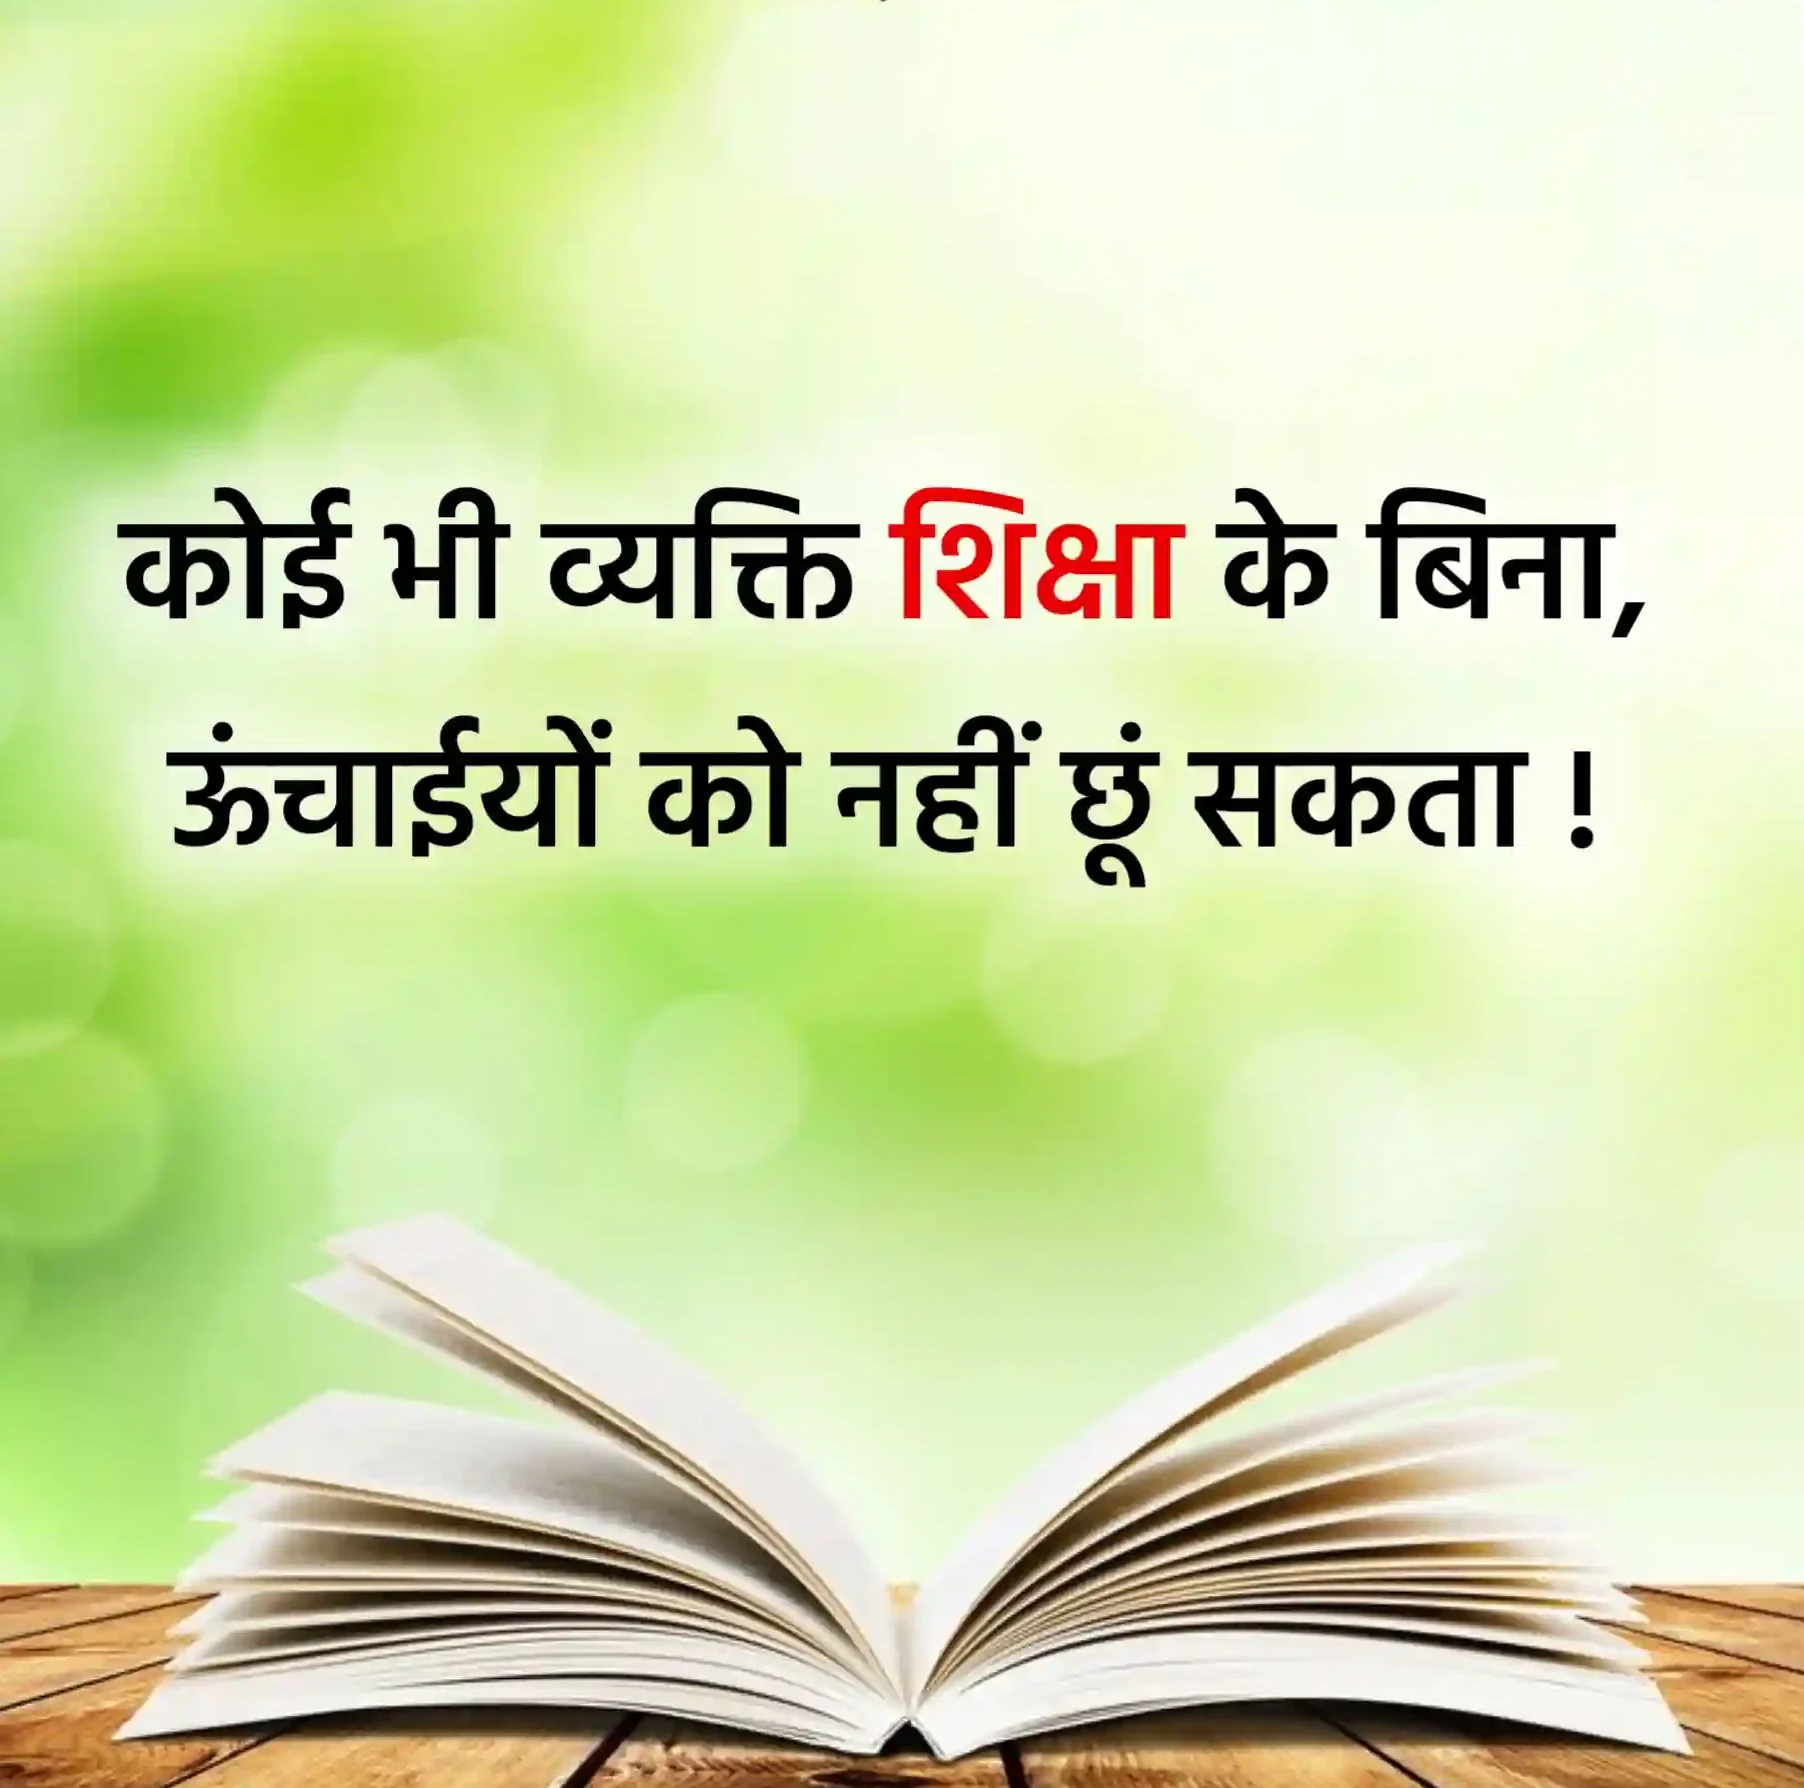 Best Education Quotes in Hindi